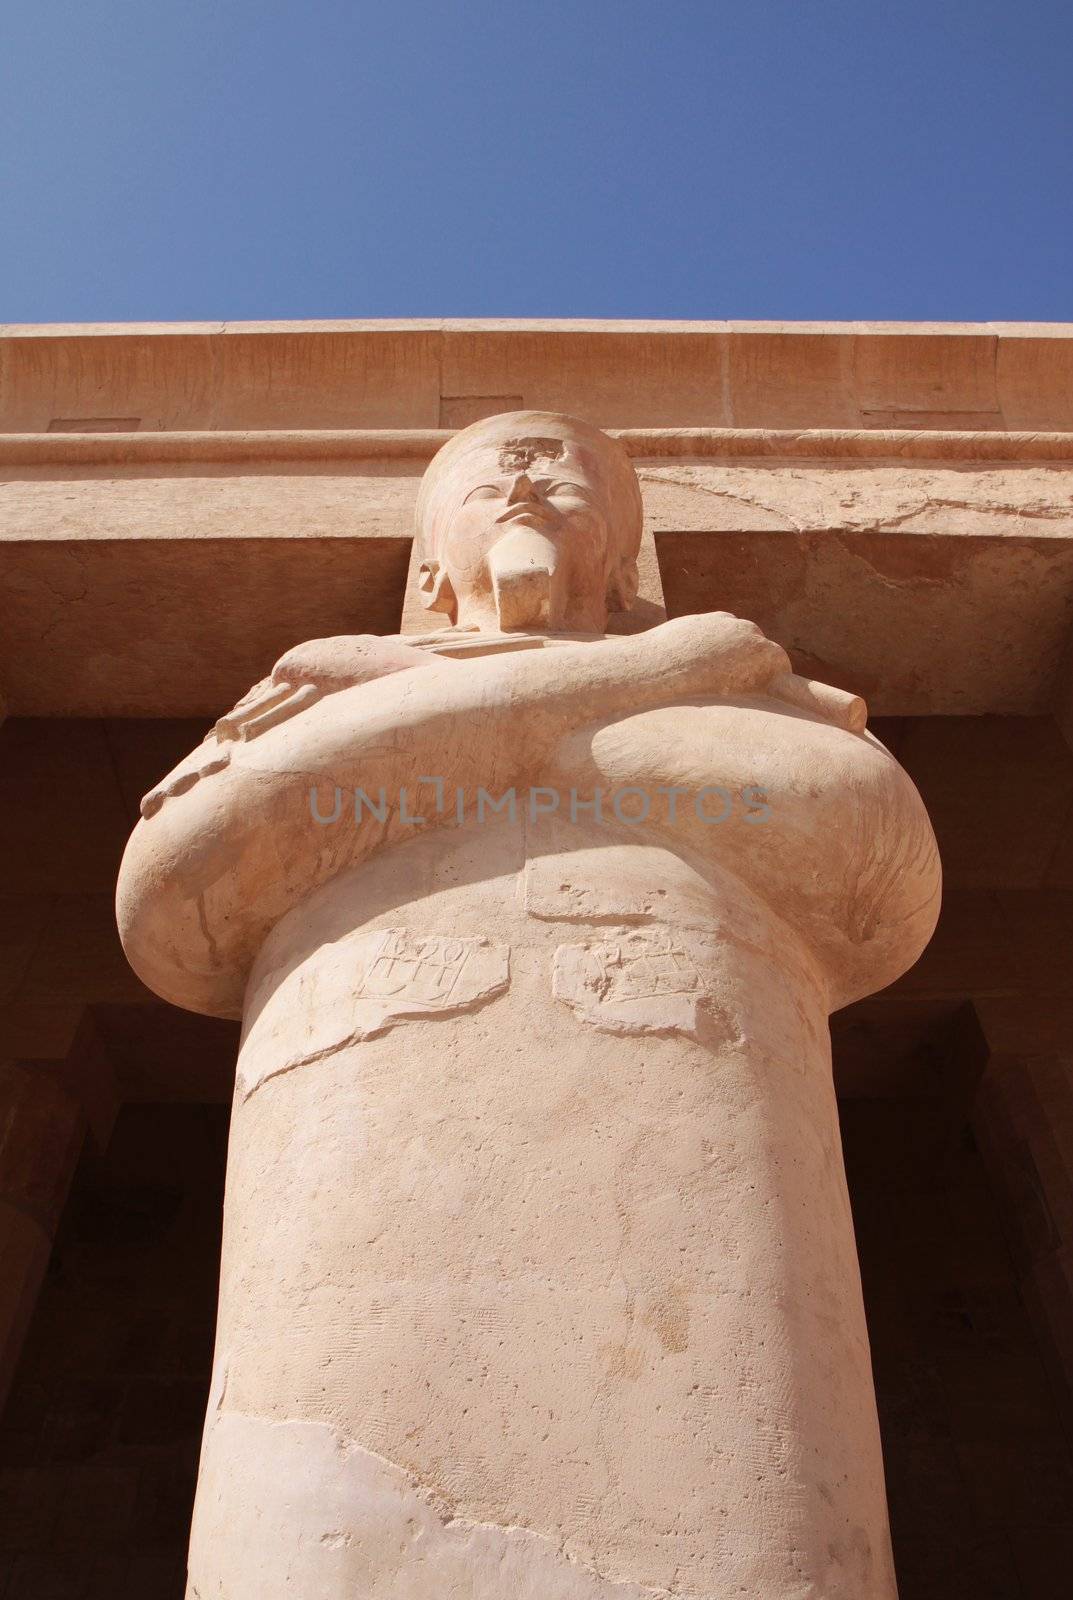 The ancient statue in Hatshepsut's temple in Egypt